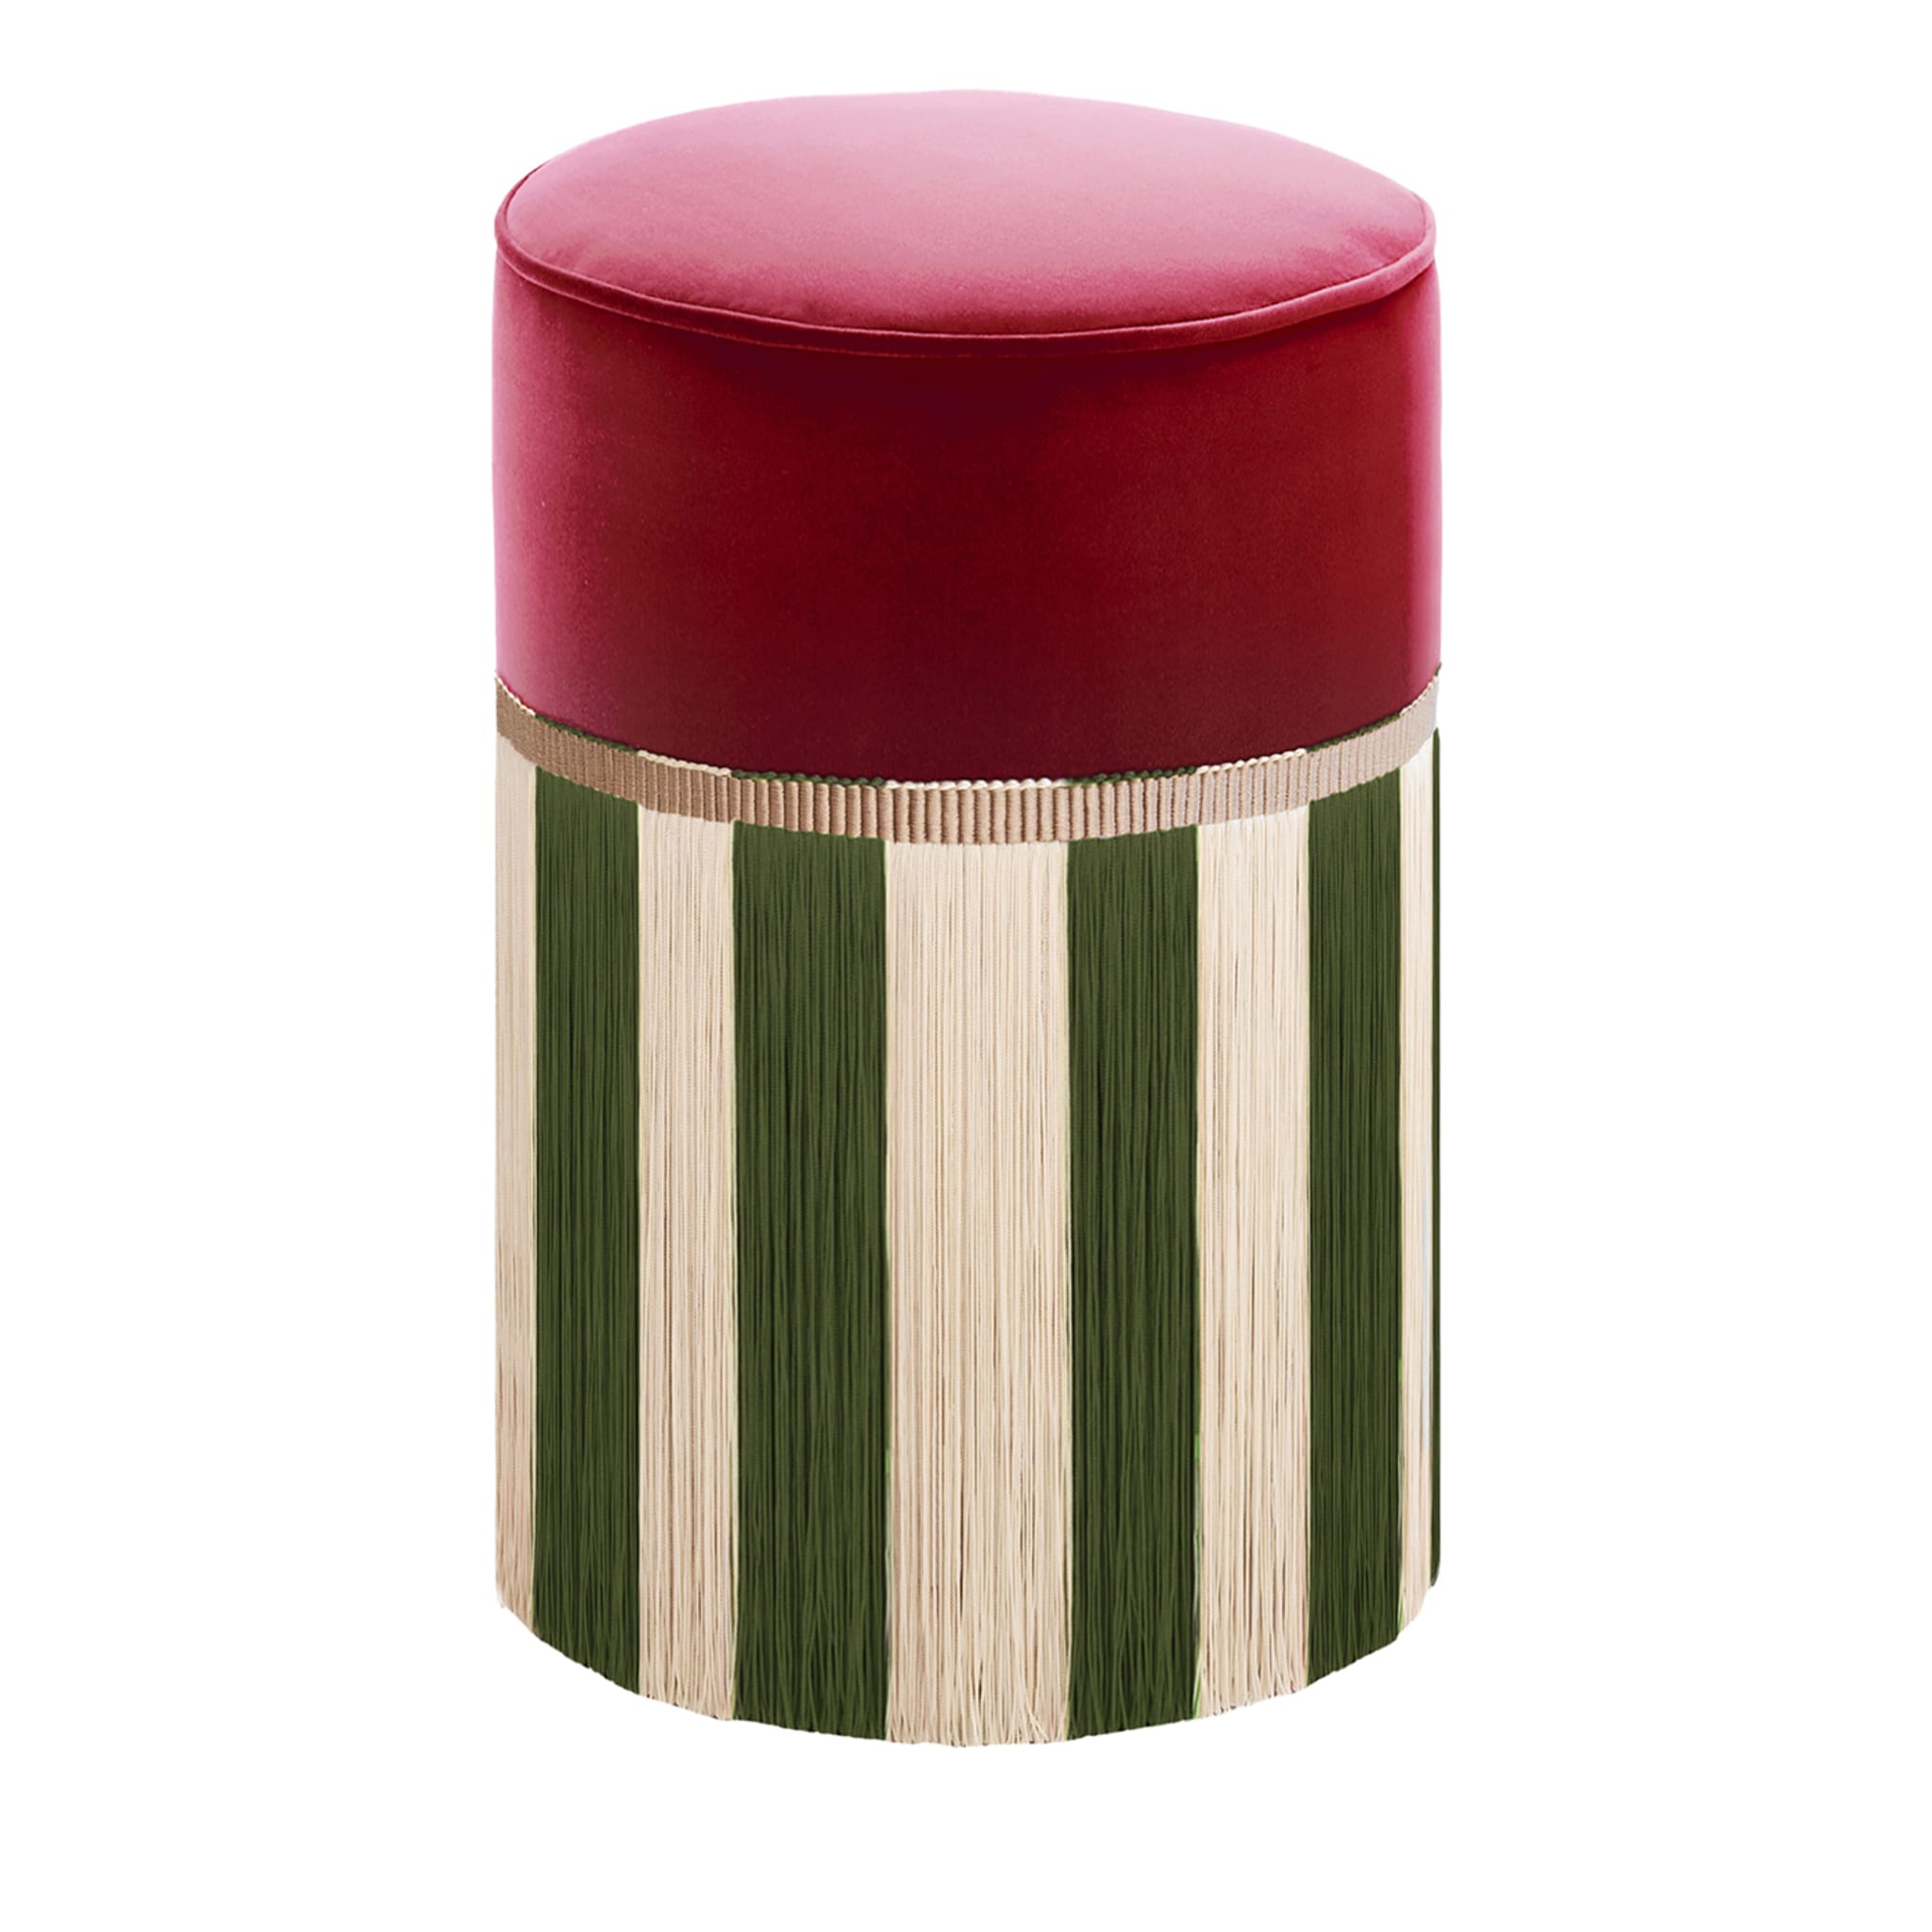 Couture Riga' Fringed Burgundy & Green Ottoman - Main view